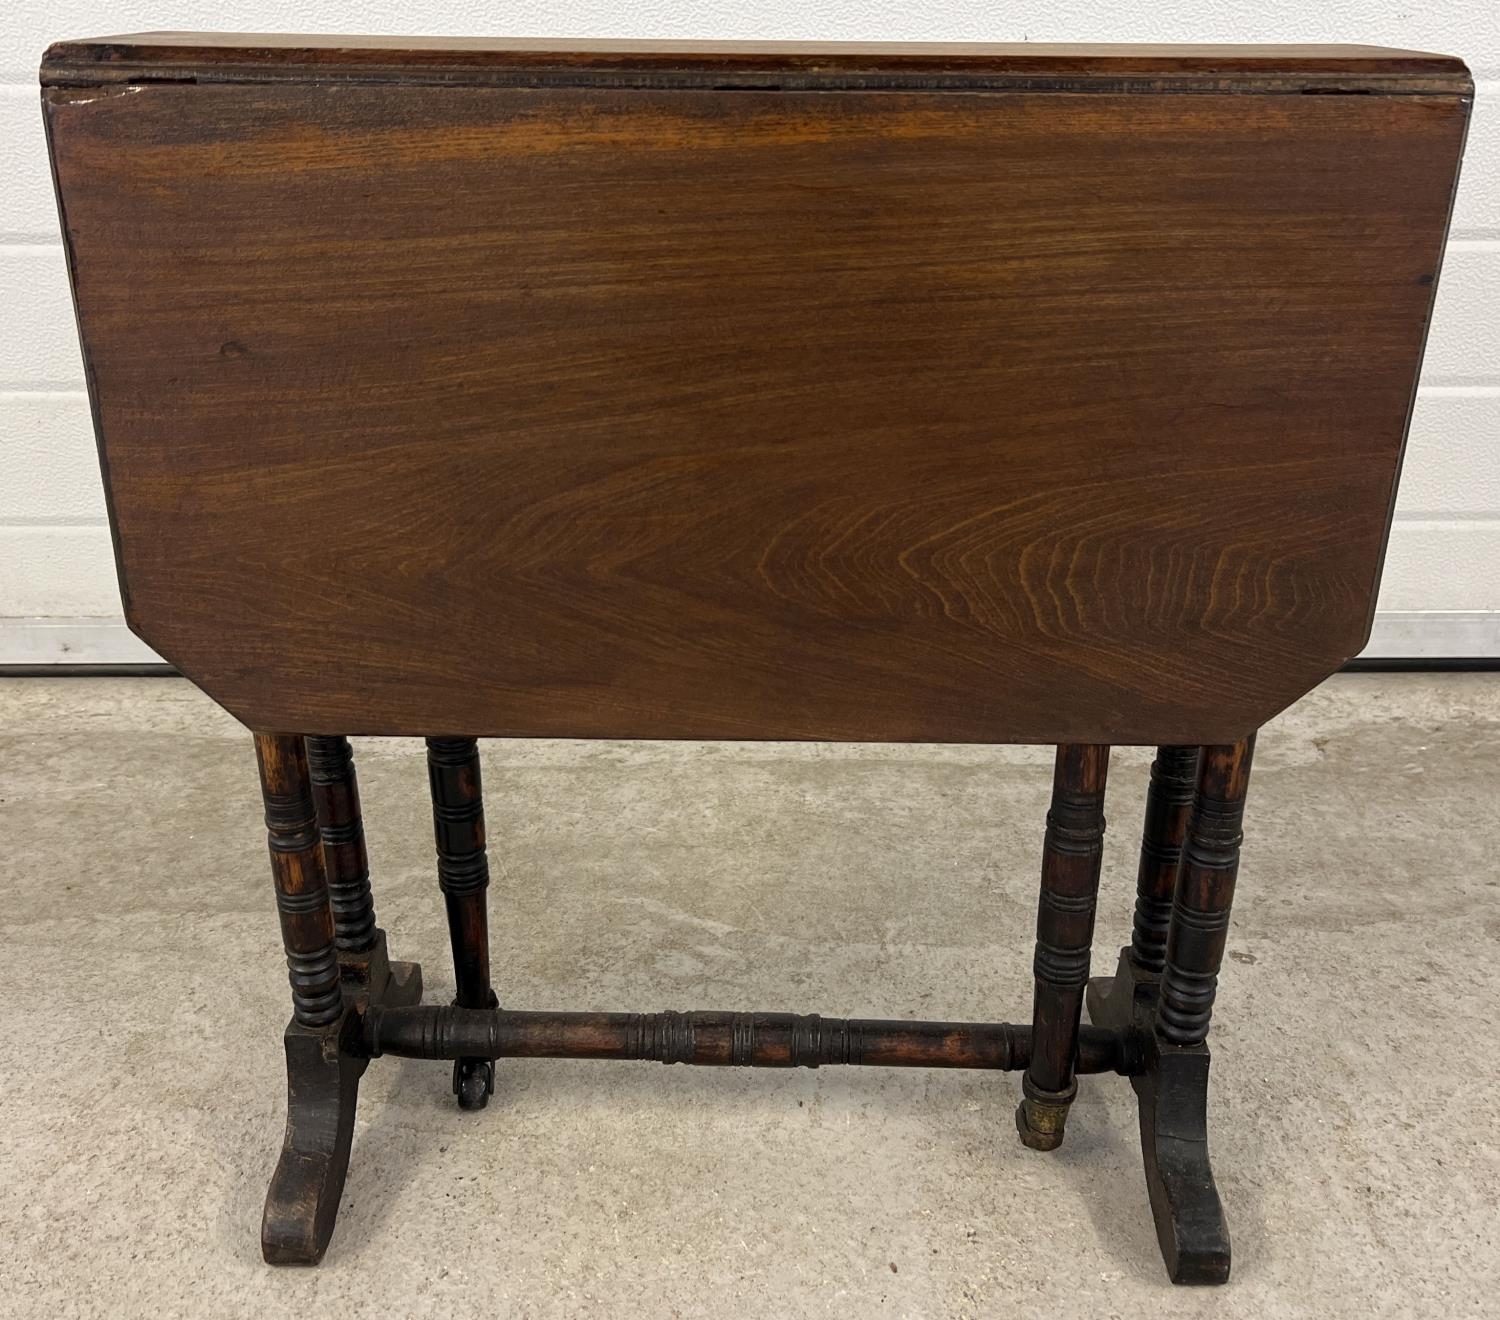 A small antique dark wood Sutherland style drop leaf table with turned detail to legs. Gateleg